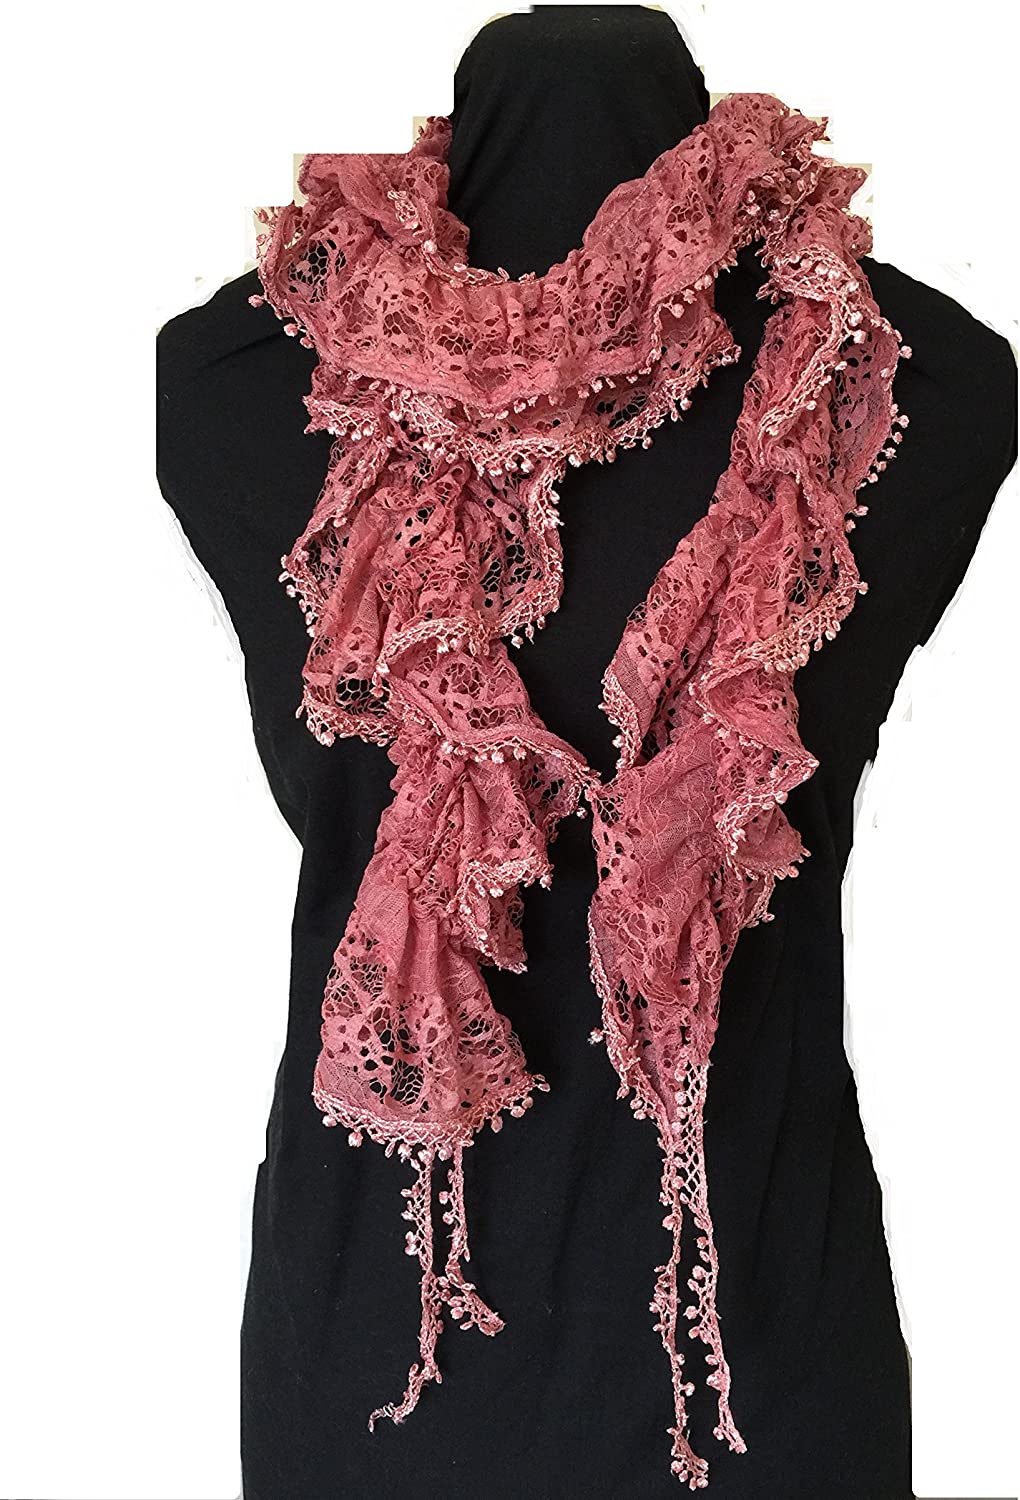 Pamper Yourself Now Deep Pink Stretchy Long lace Scarf with Tassels, Lovely Fashion Item. Fantastic Gift